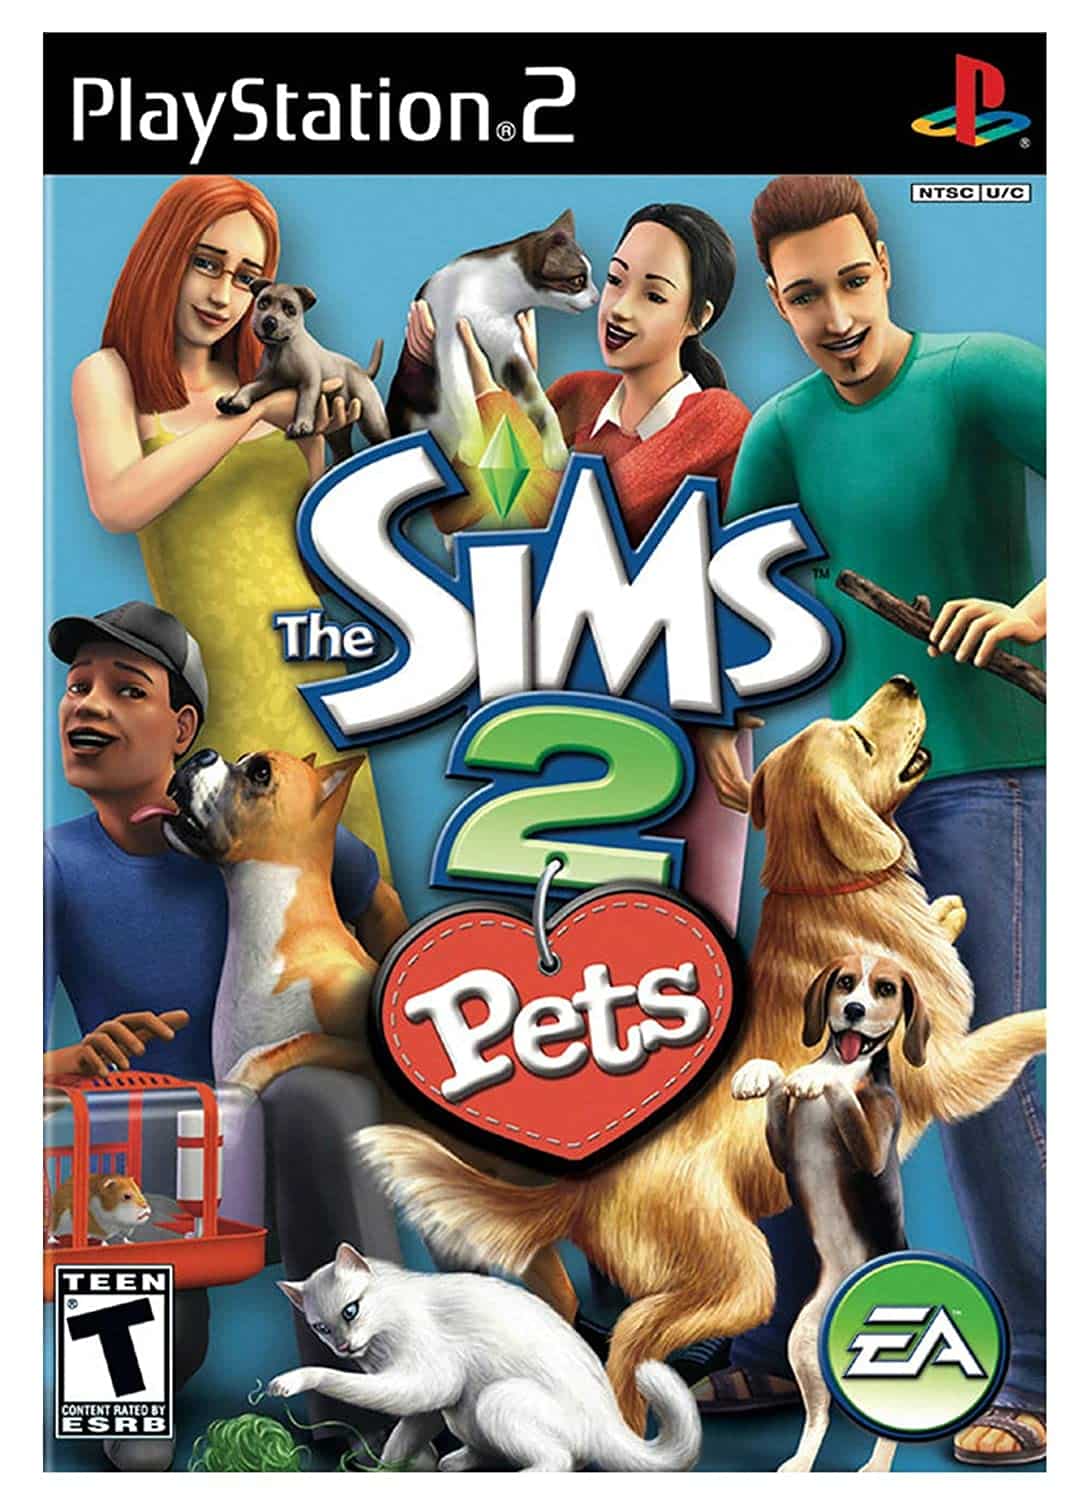 The Sims 2: Pets player count stats